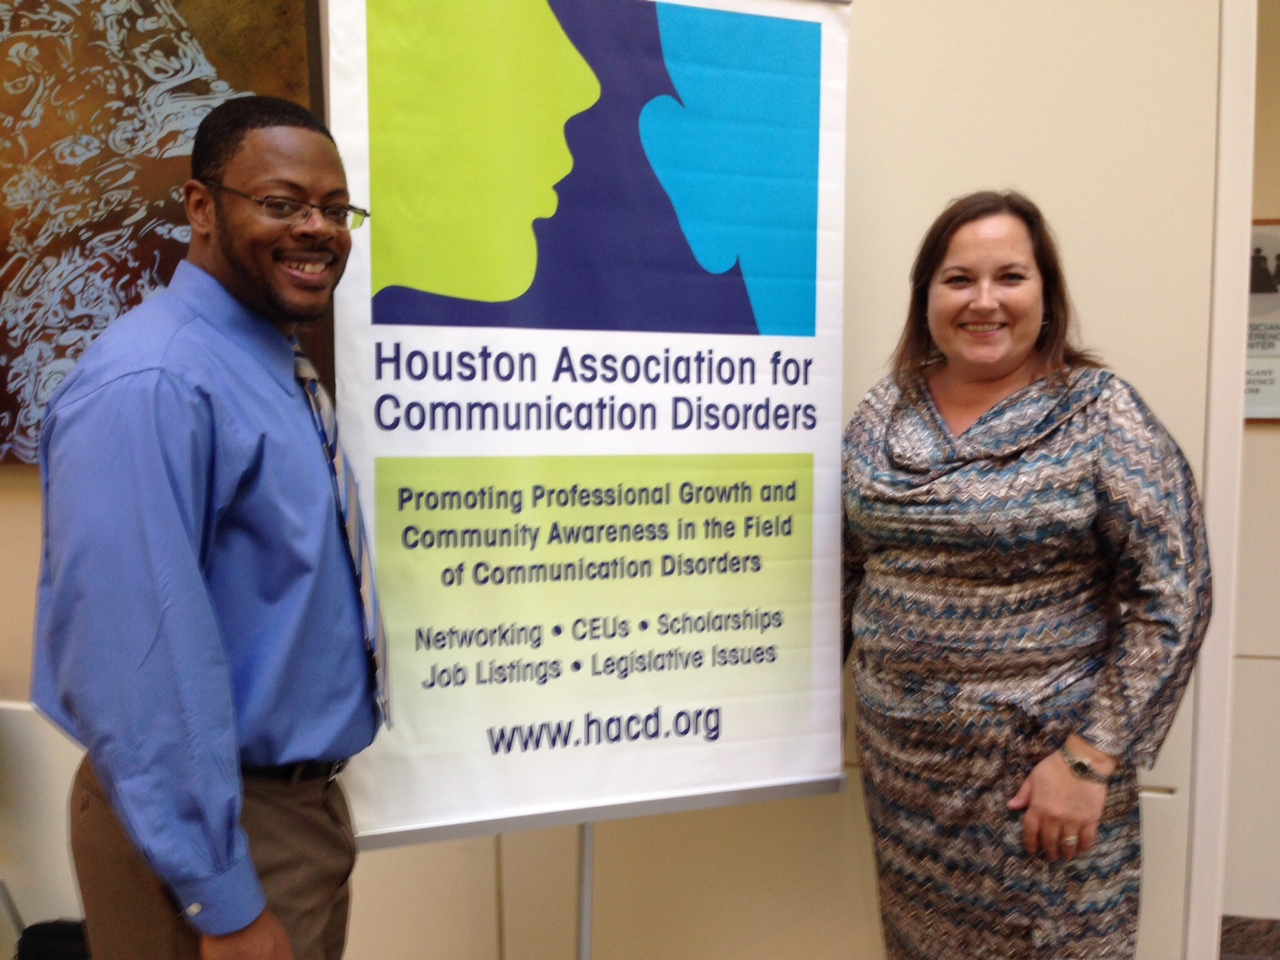 Dr. Ivey and Dr. Ross present at HACD